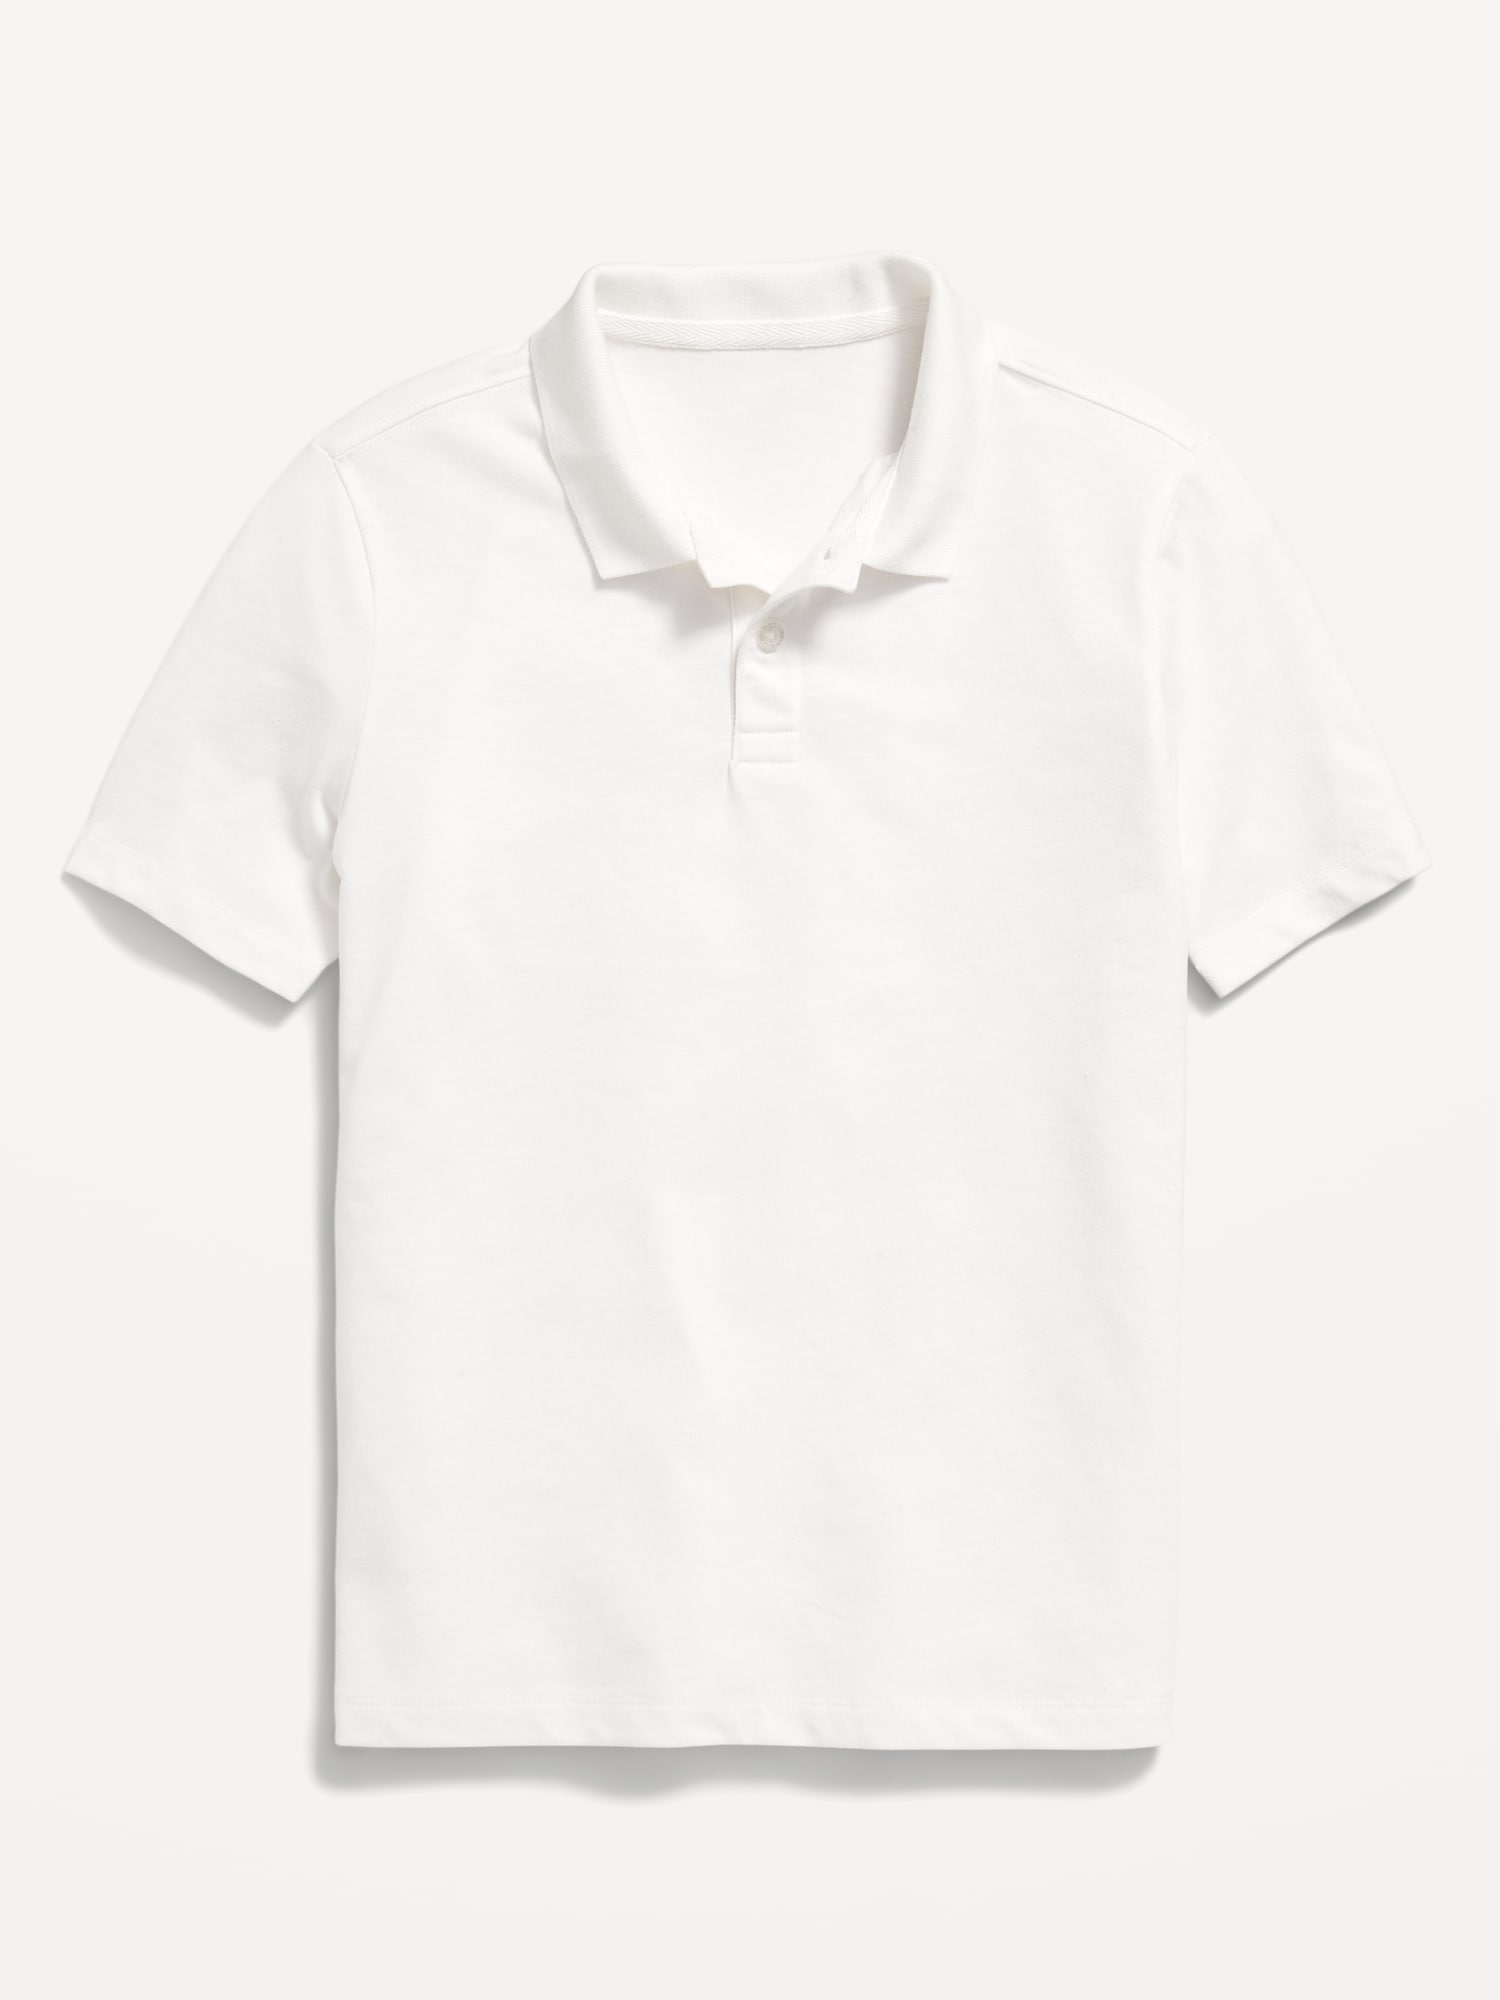 Old Navy School Uniform Jersey-Knit Polo Shirt for Boys white. 1